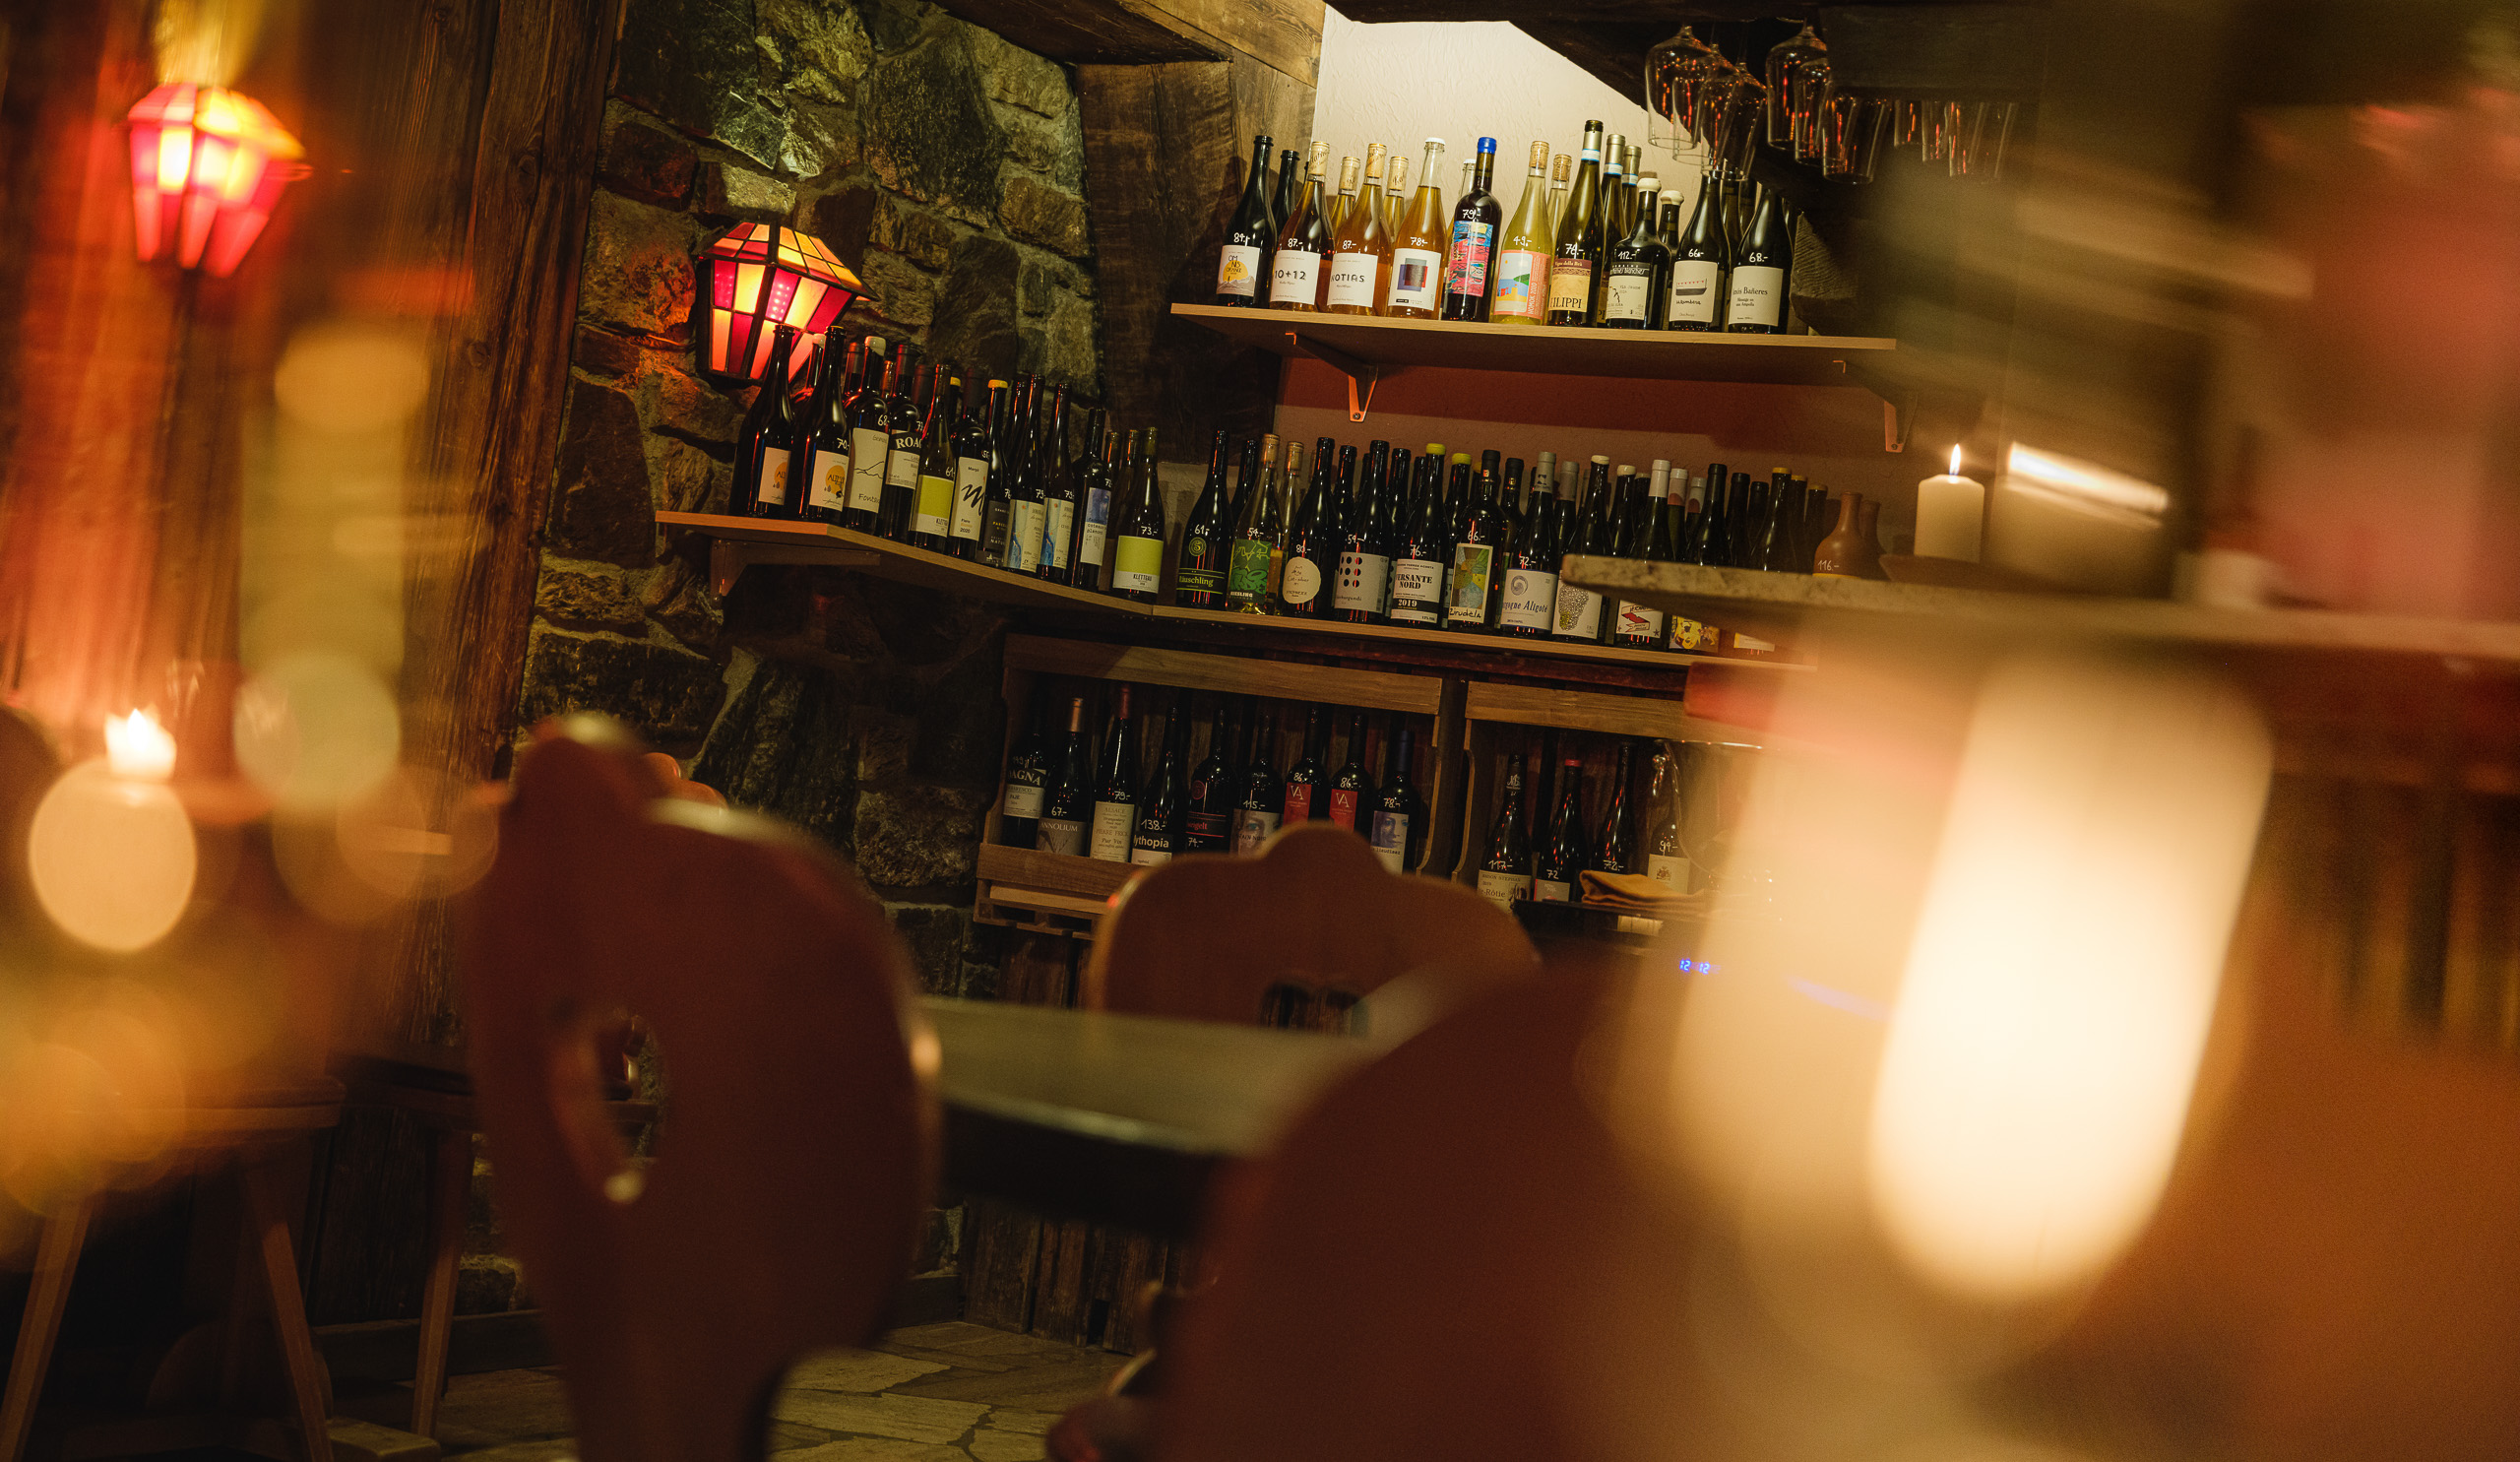 In the natural wine bar many local wines are served